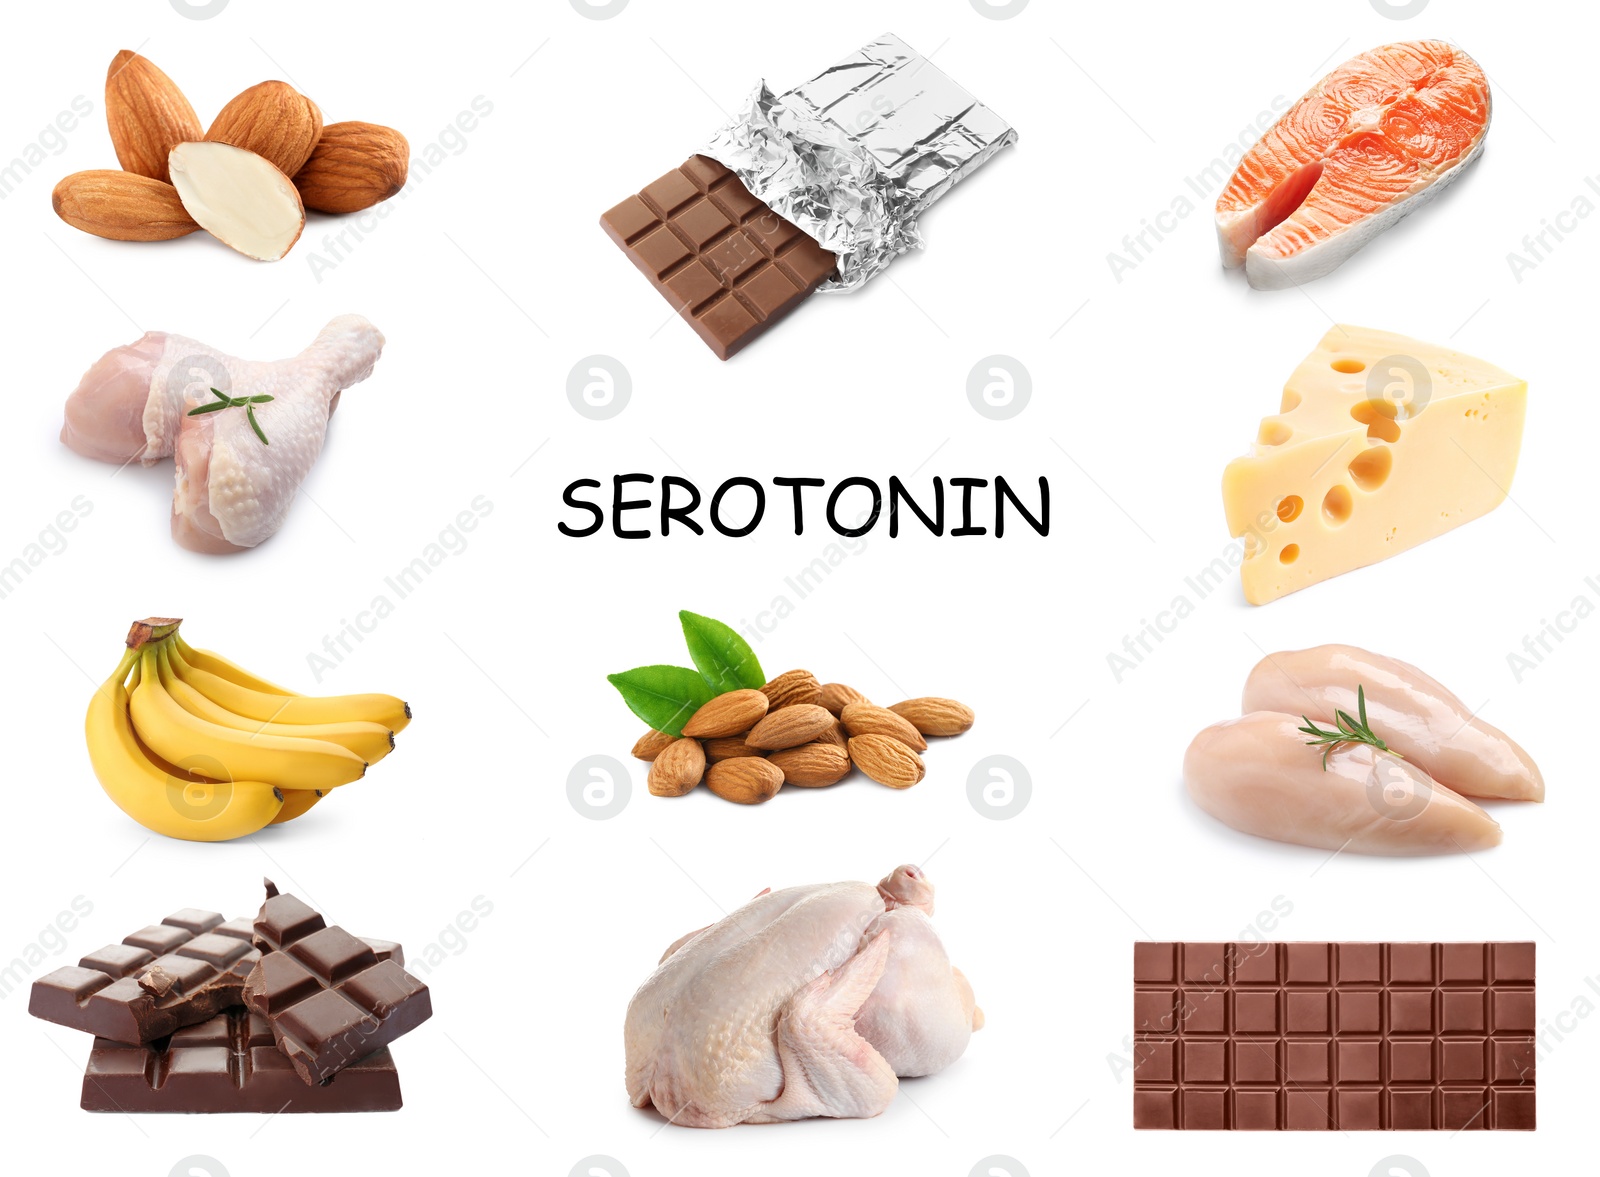 Image of Different foods rich in serotonin that can help you stay cheerful. Different tasty products on white background